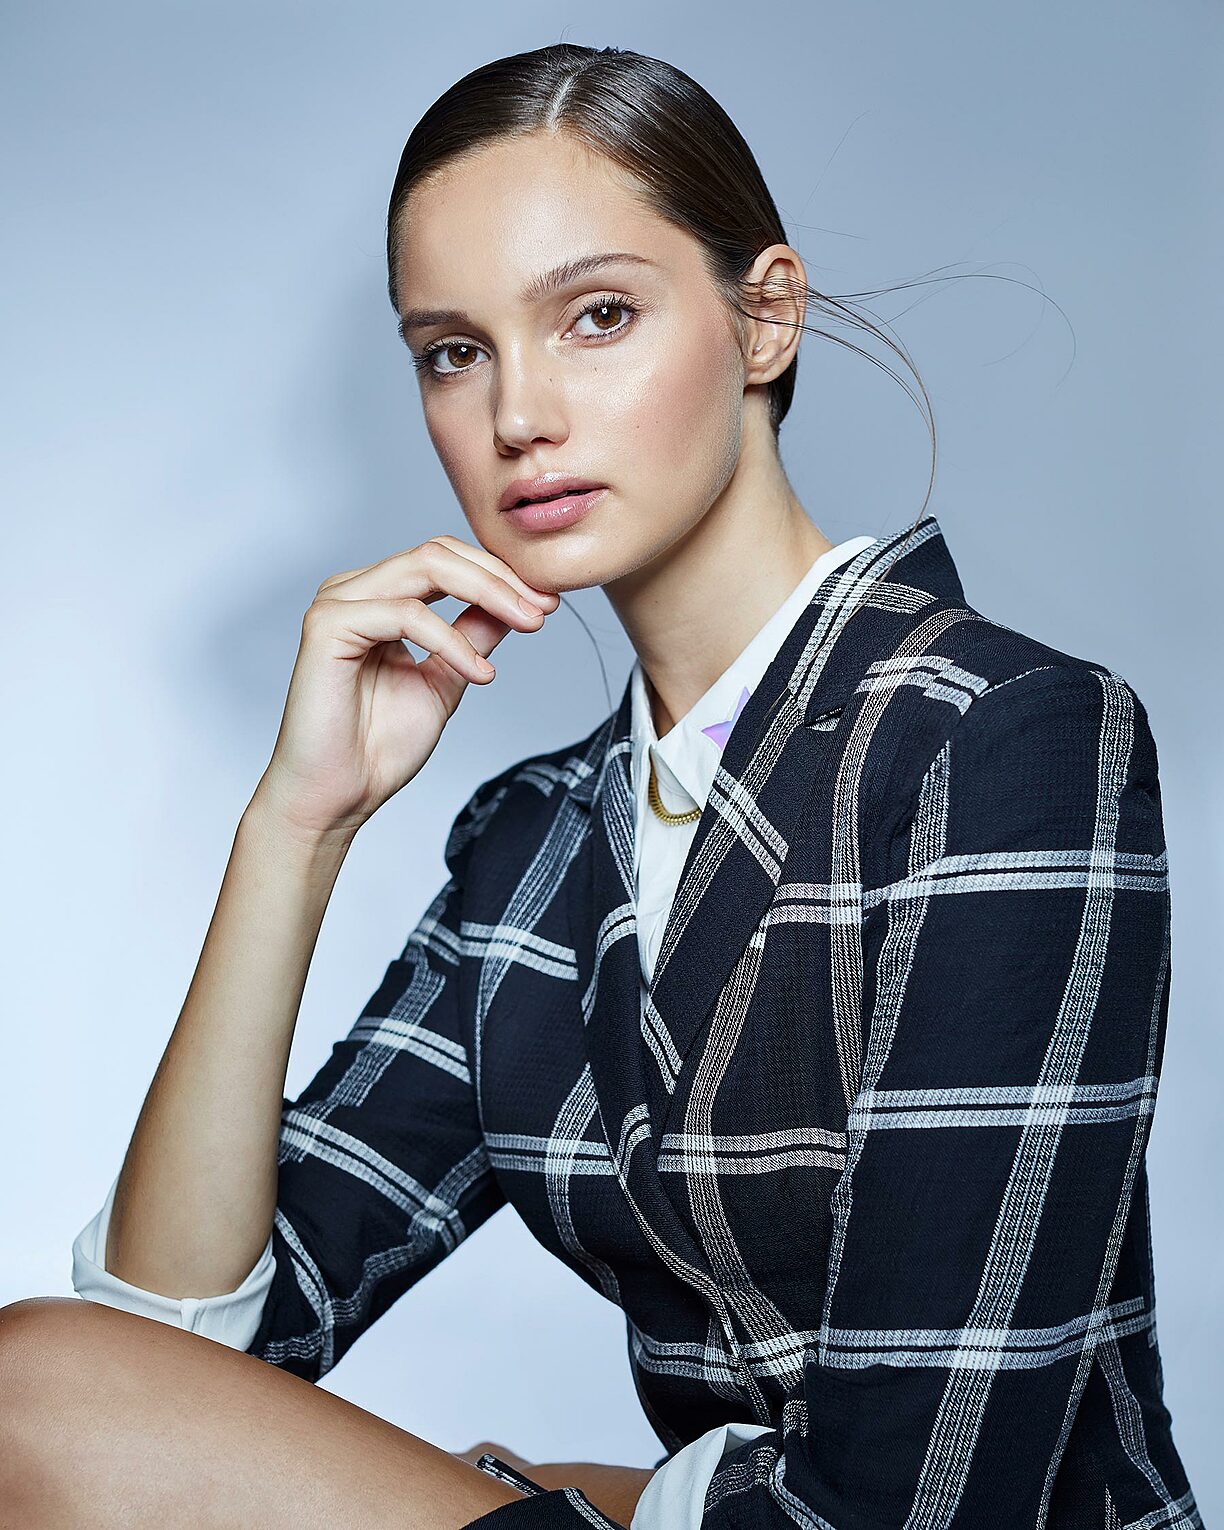 A female model who wears a checked blazer with a white blouse and sleek brown hair